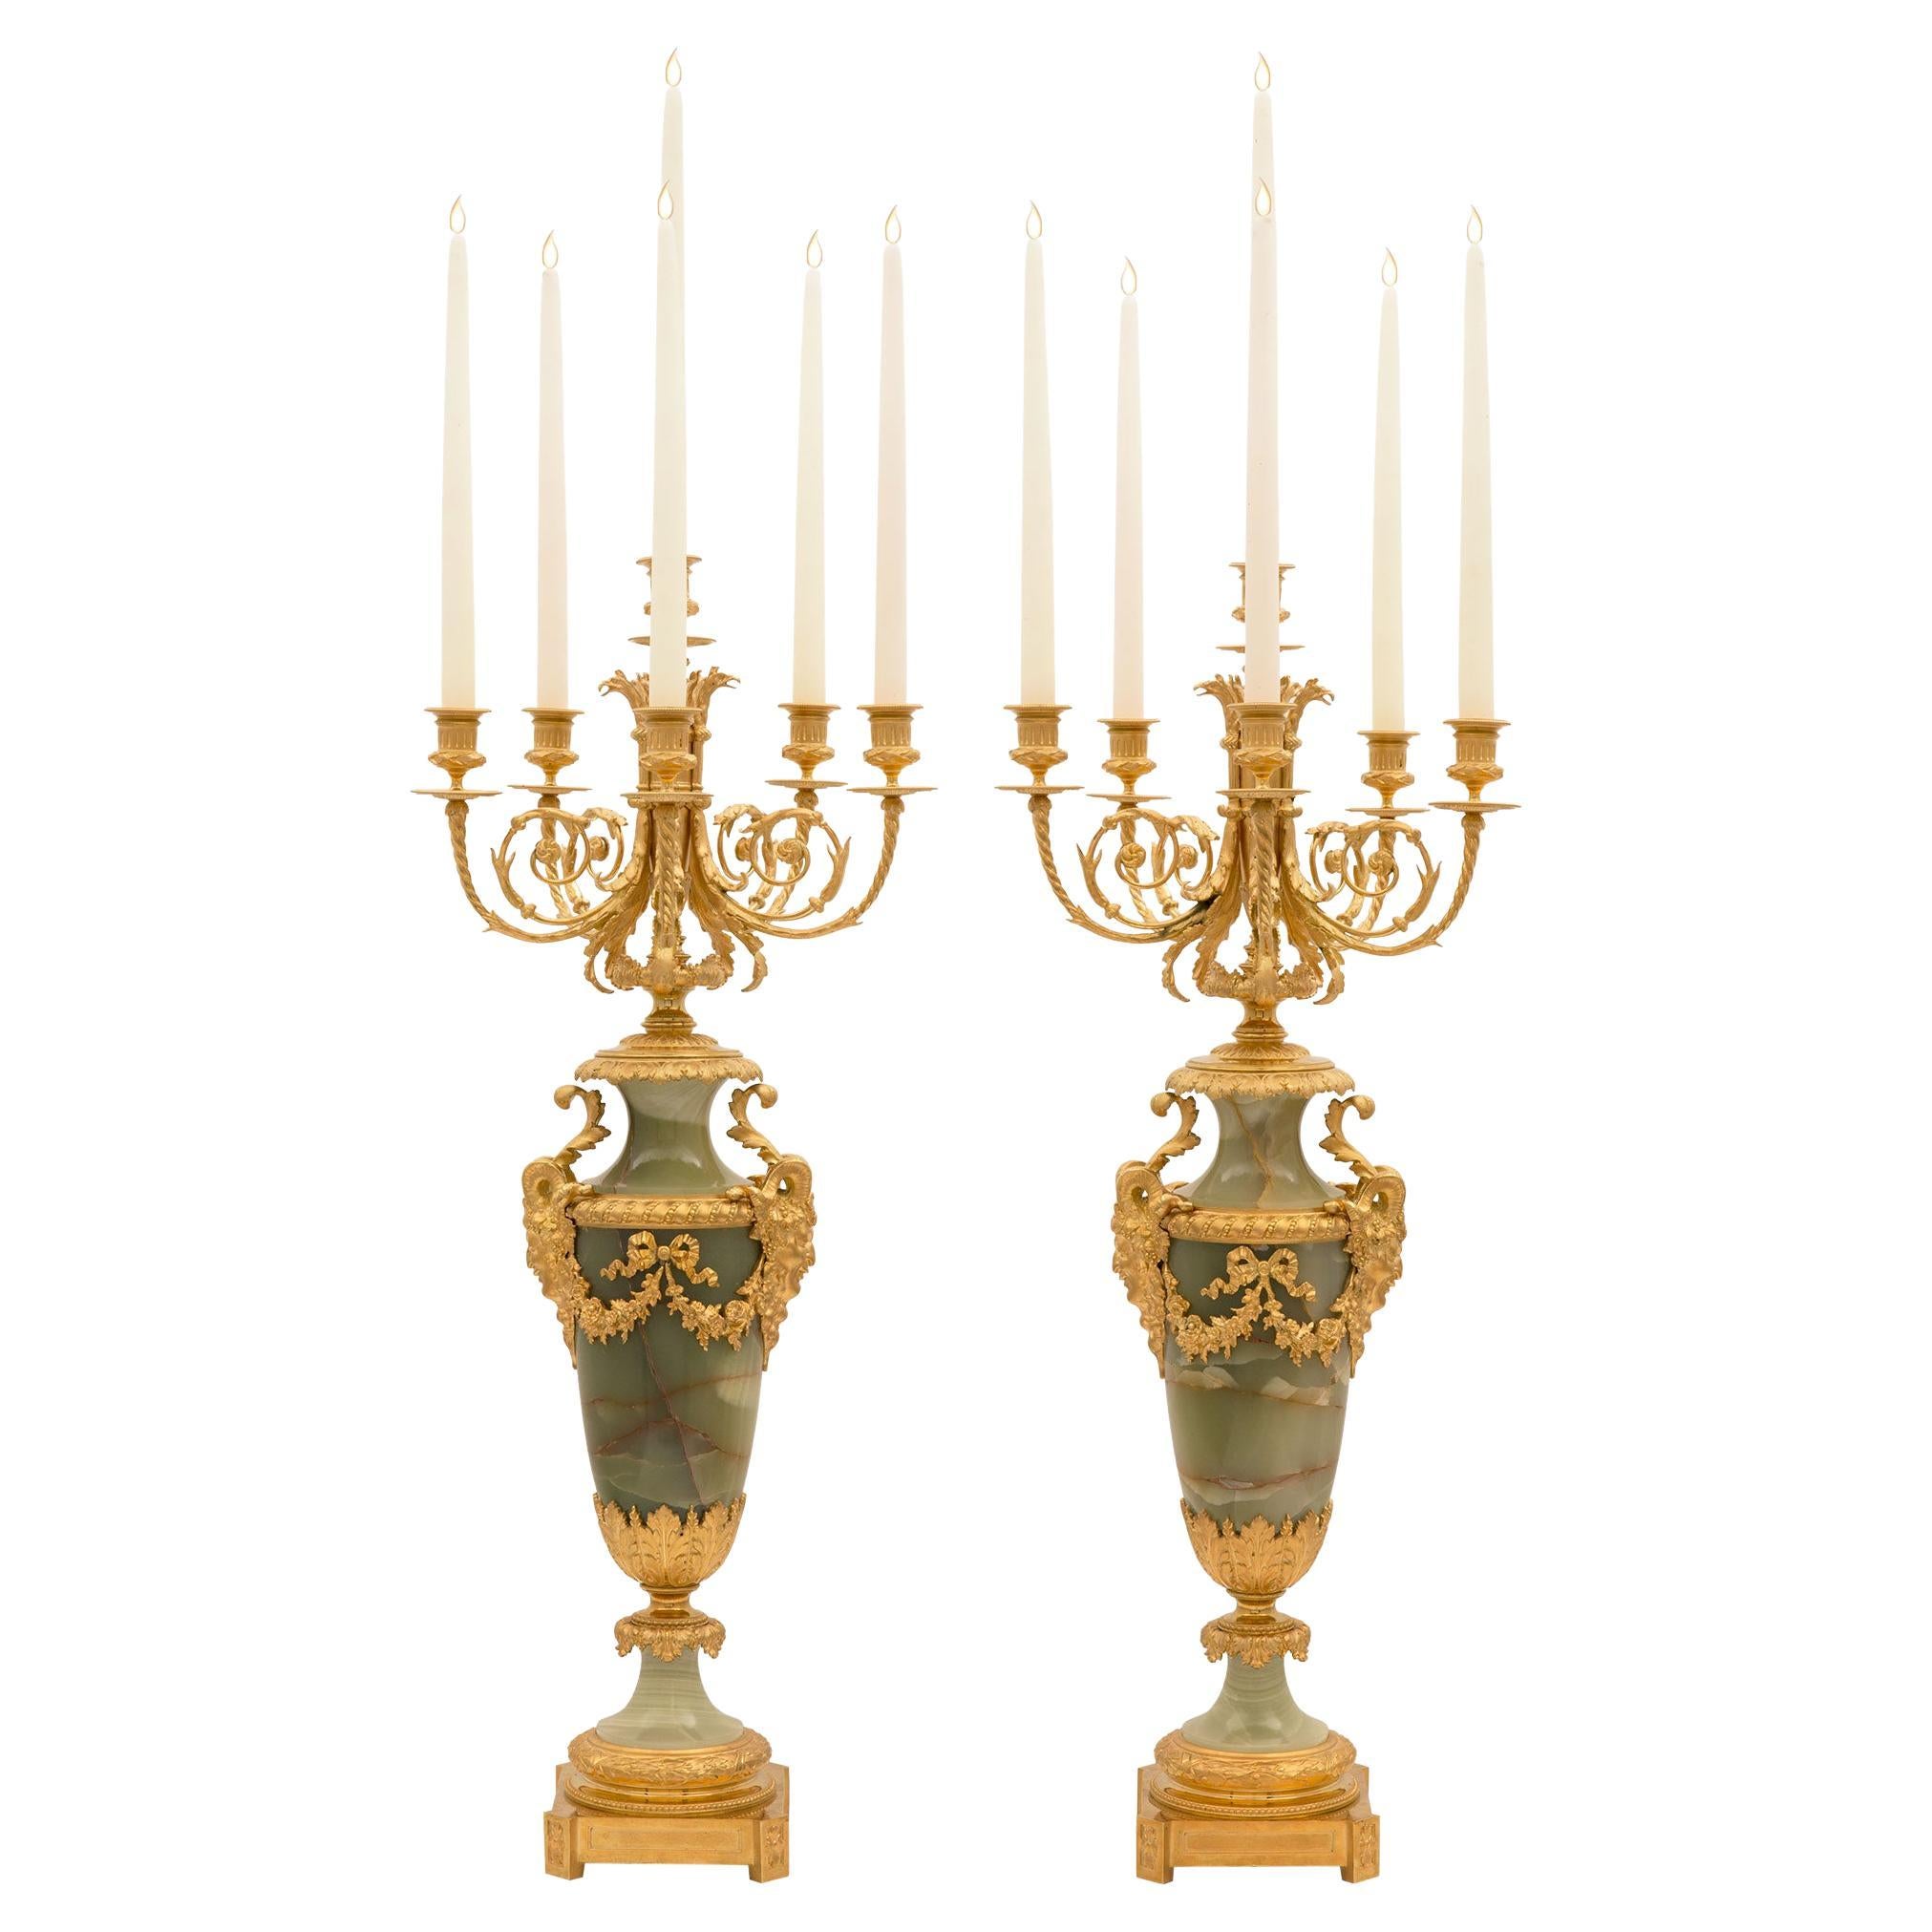 Pair of French 19th Century Louis XVI Style Green Onyx and Ormolu Candelabras For Sale